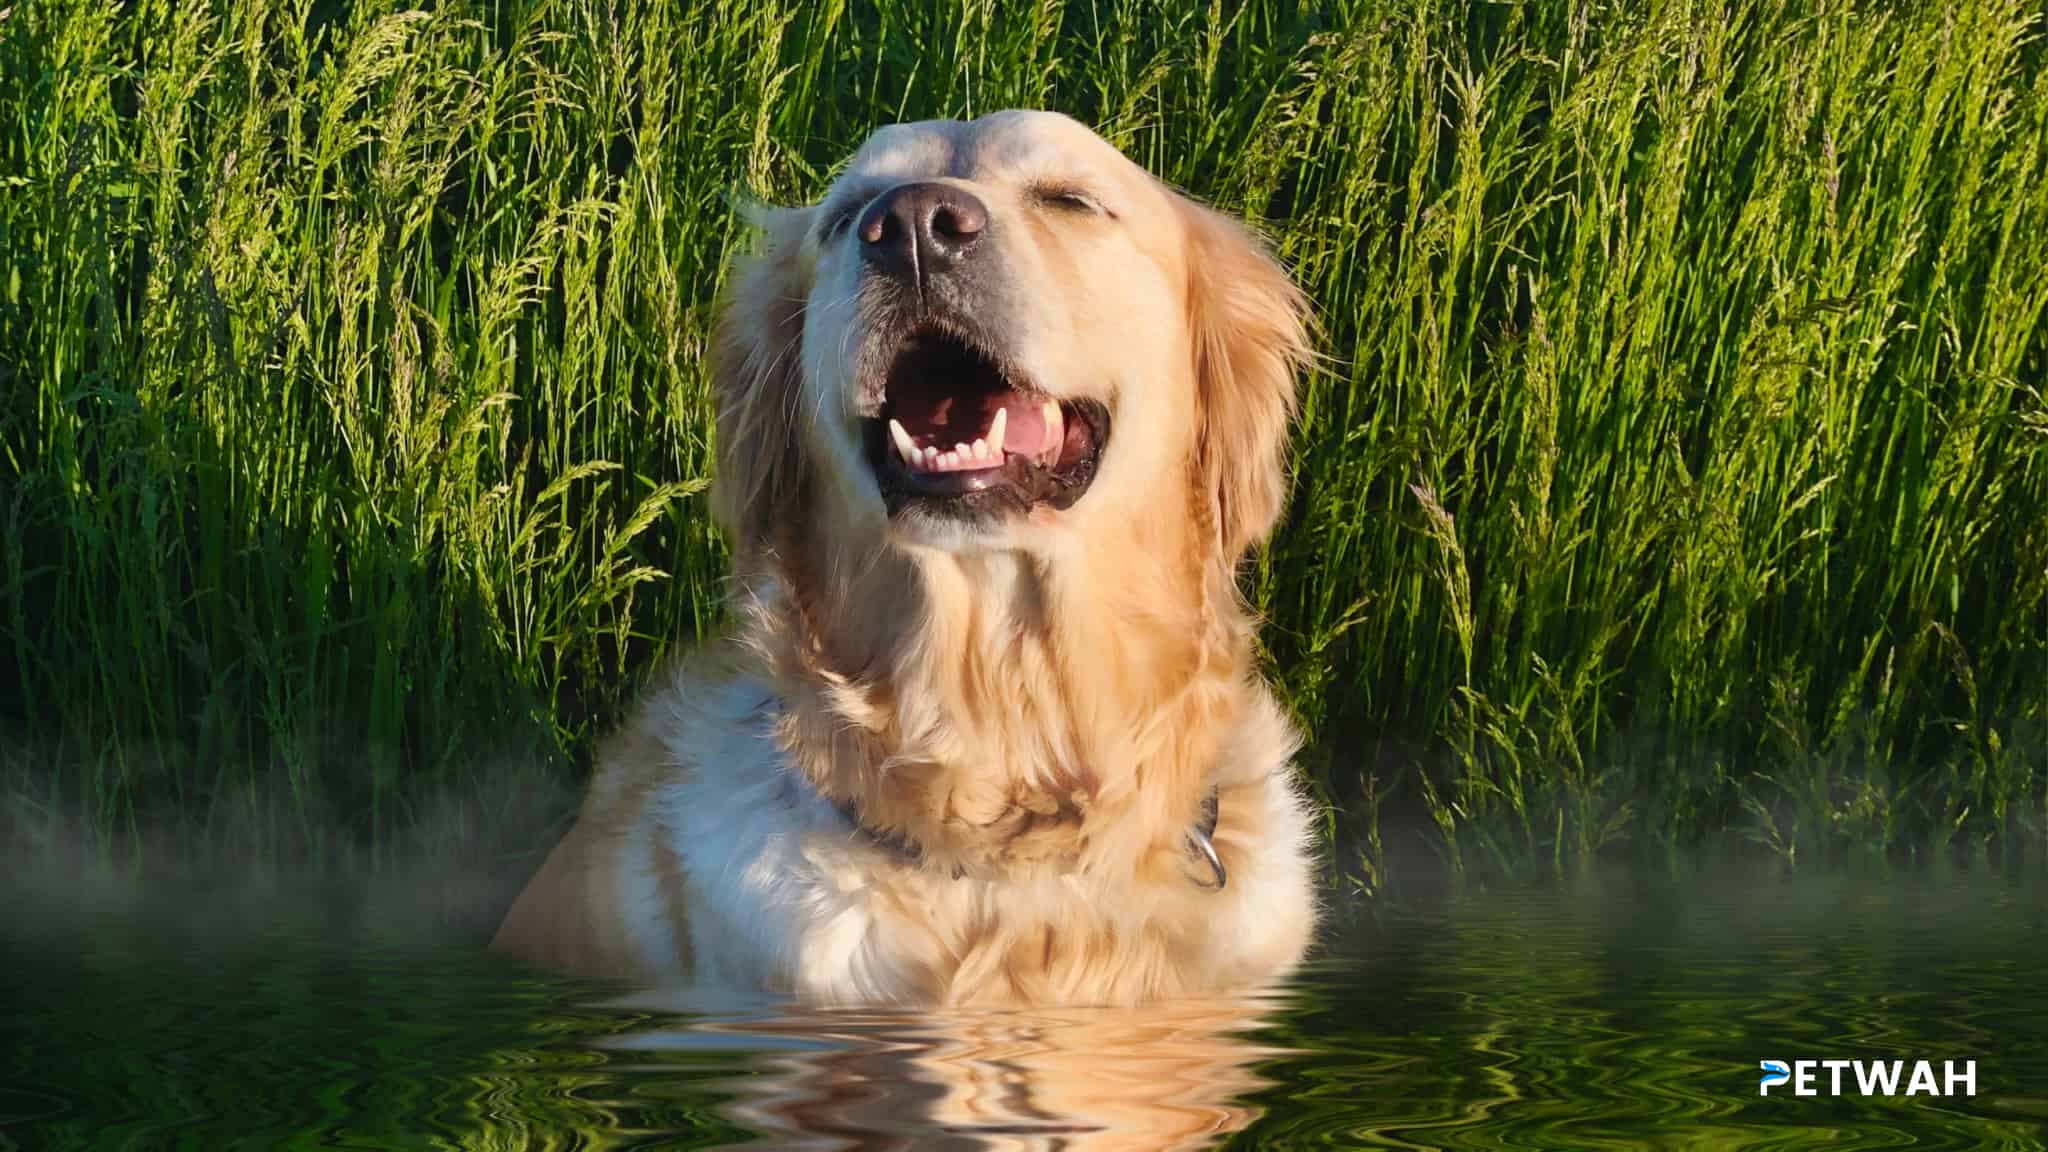 Planning Dog-Friendly Vacations with Your Golden Retriever